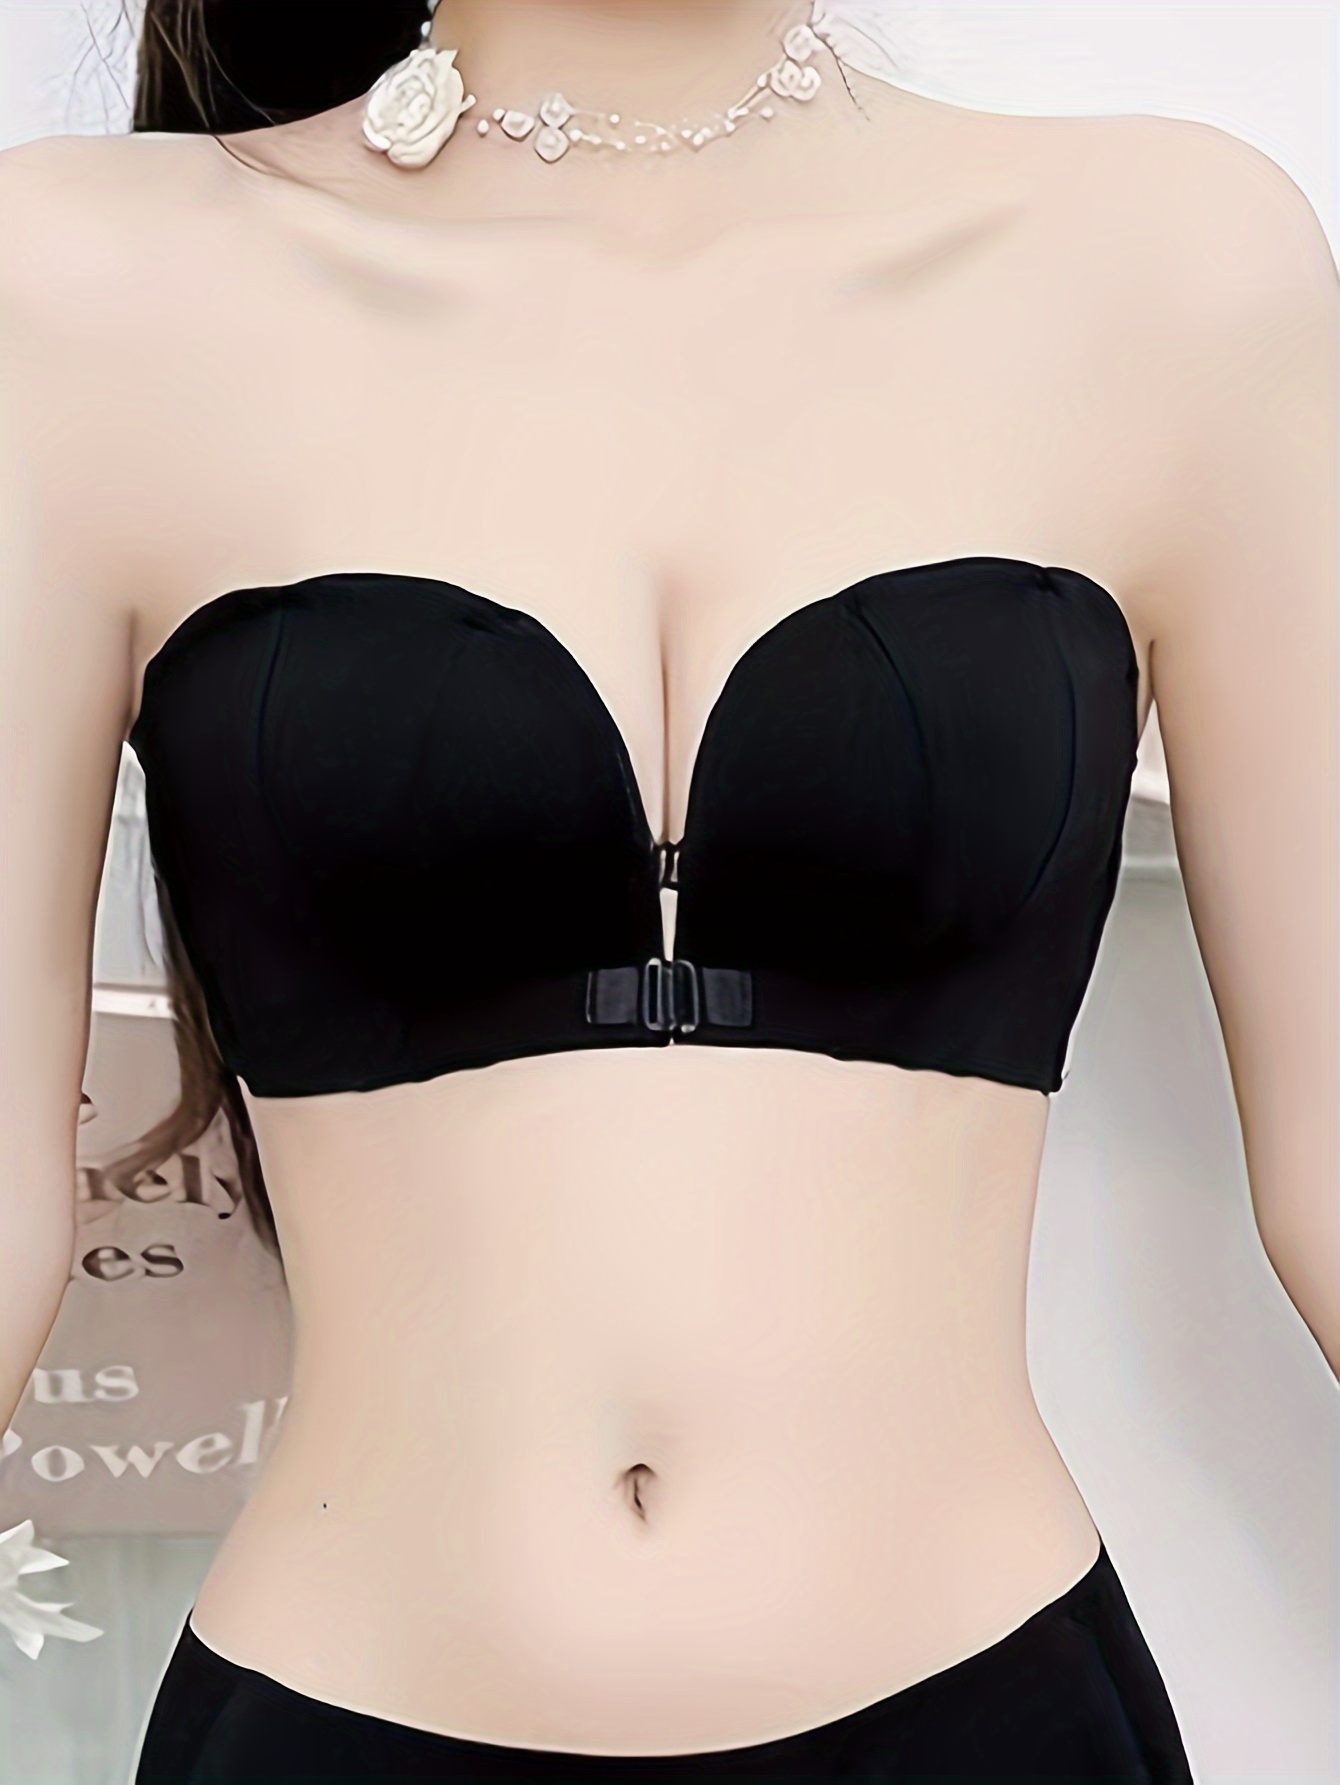 Women's Lingerie Strapless Front Buckle Lift Up Bra, Wire-free